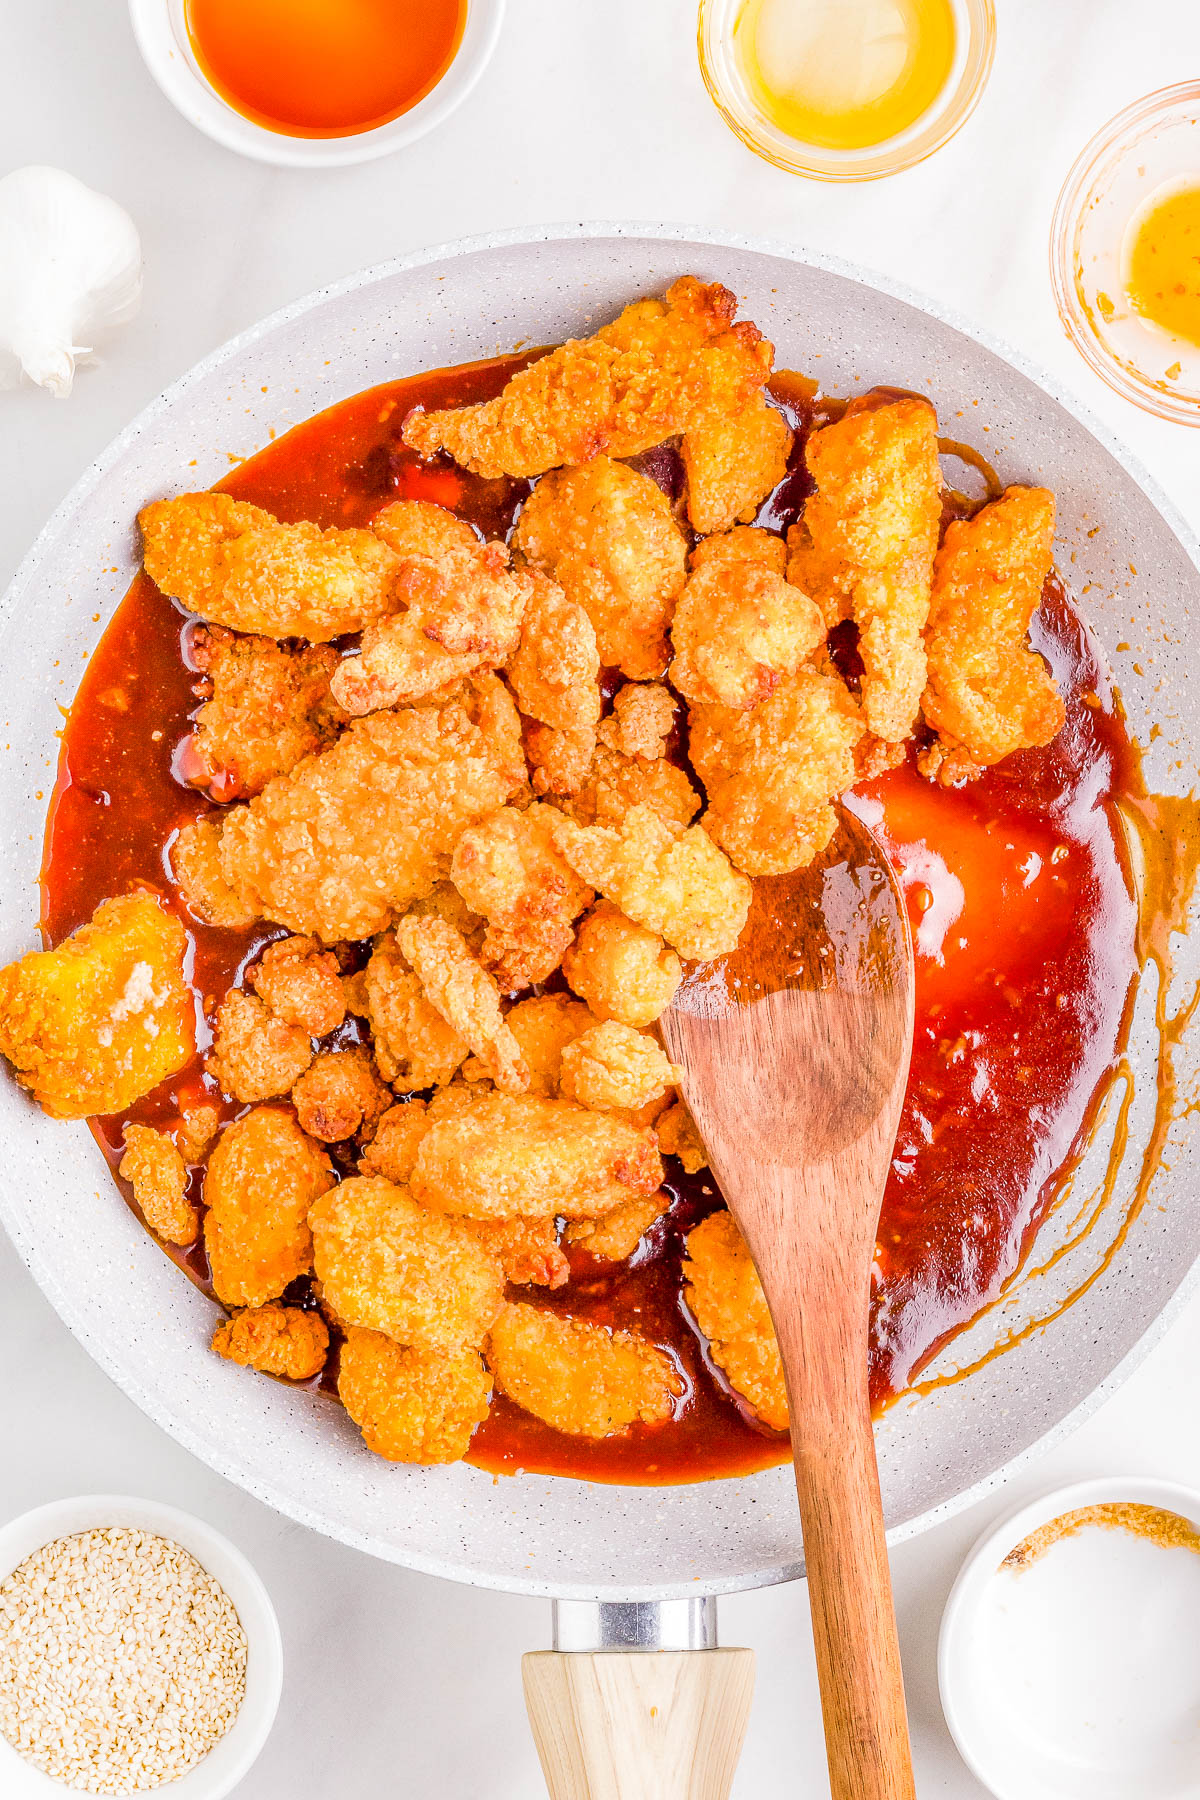 Baked chicken pieces being tossed in a sauce in a white skillet, surrounded by ingredients like honey and garlic.